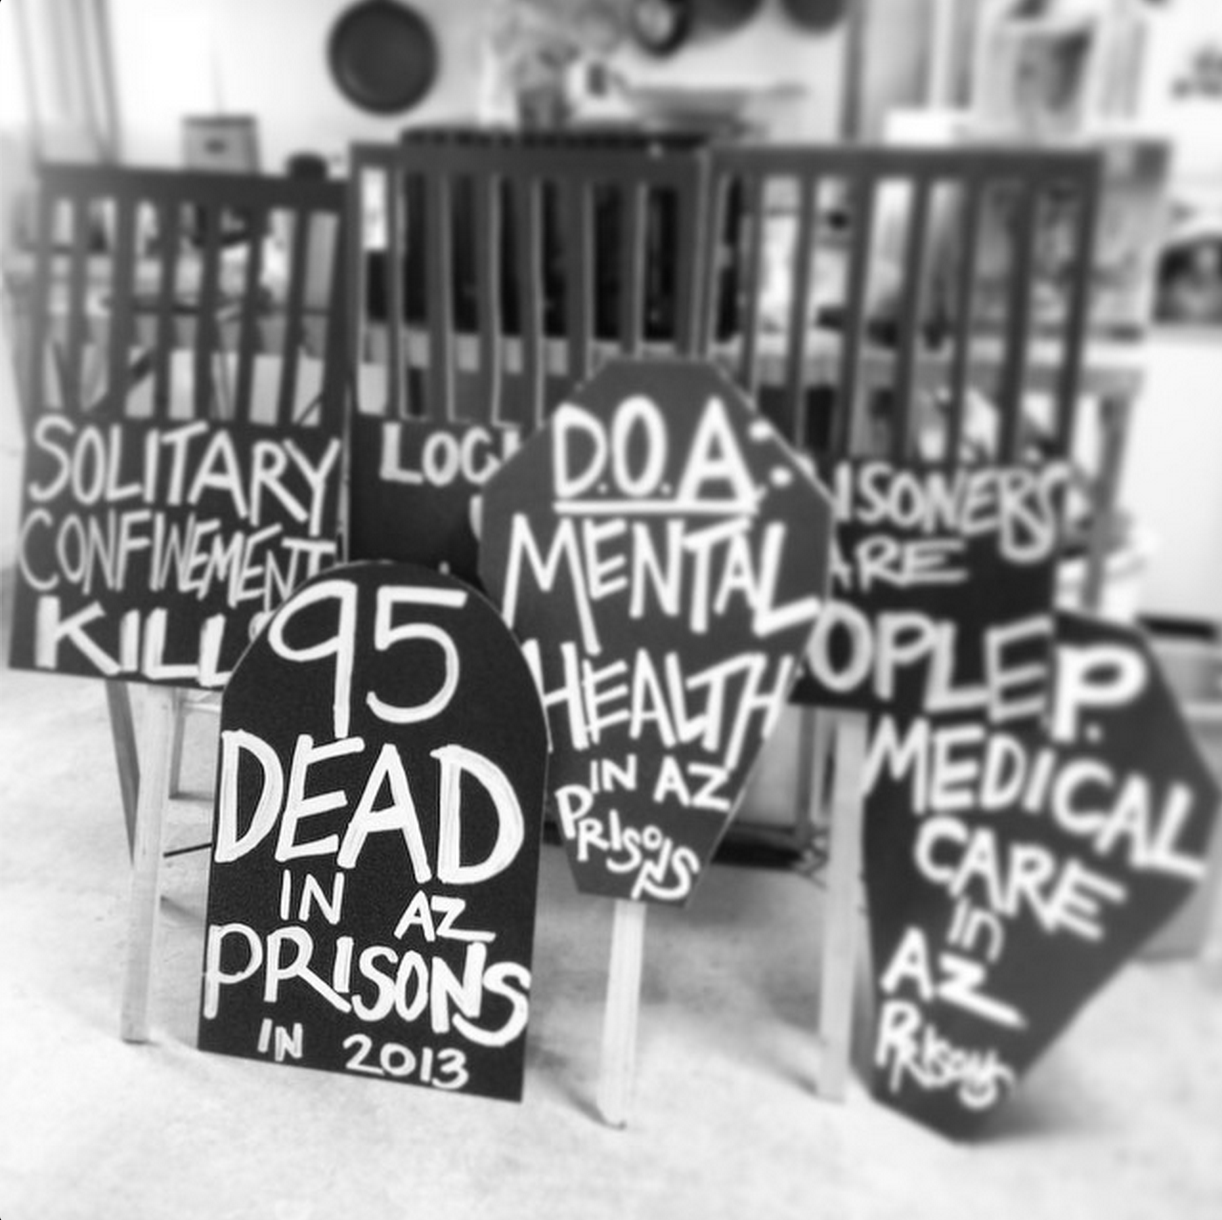 Solitary confinement kills signs